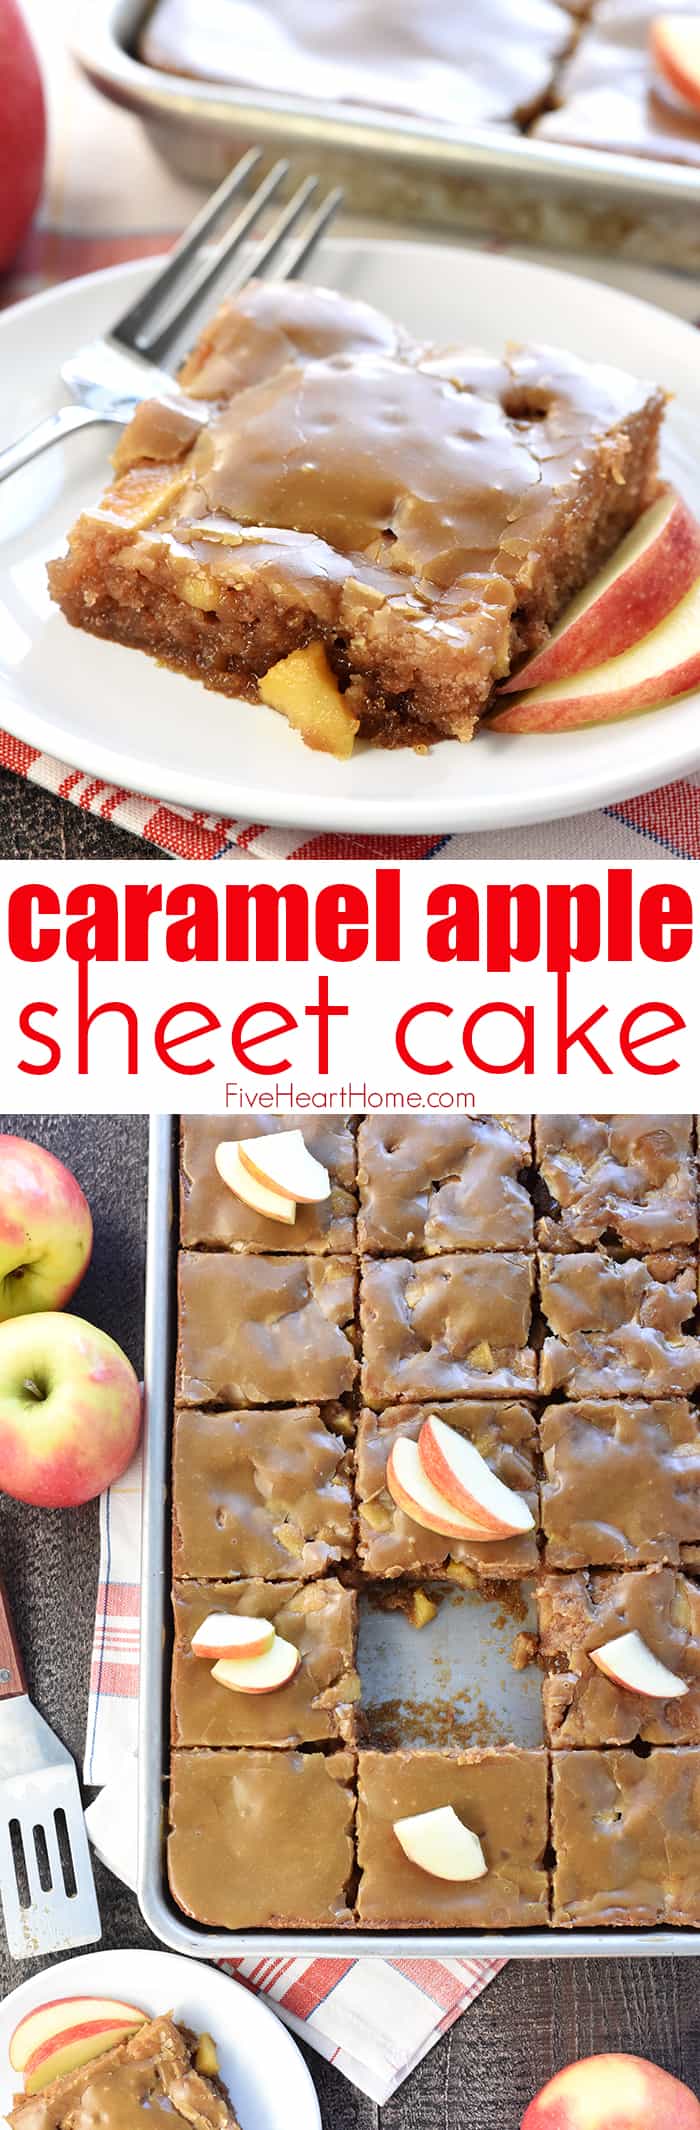 Caramel Apple Sheet Cake ~ a sweet, moist cake loaded with tender apples and topped with gooey caramel glaze...the perfect fall dessert for feeding a crowd! | FiveHeartHome.com via @fivehearthome